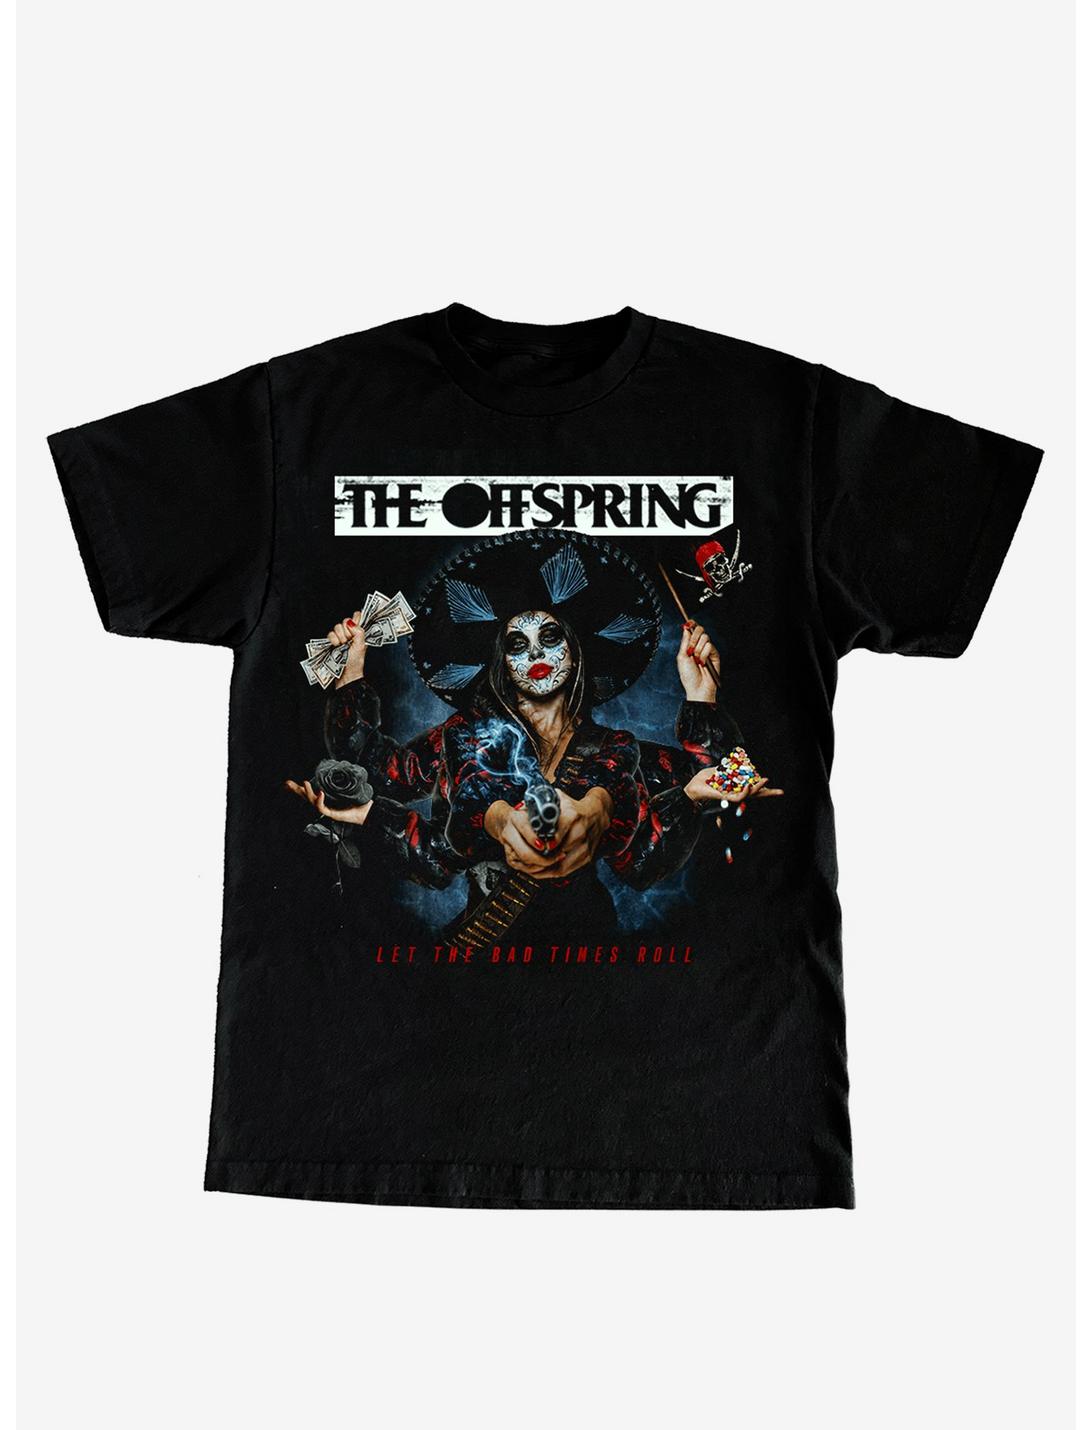 The Offspring Let The Bad Times Roll T-Shirt, BLACK, hi-res